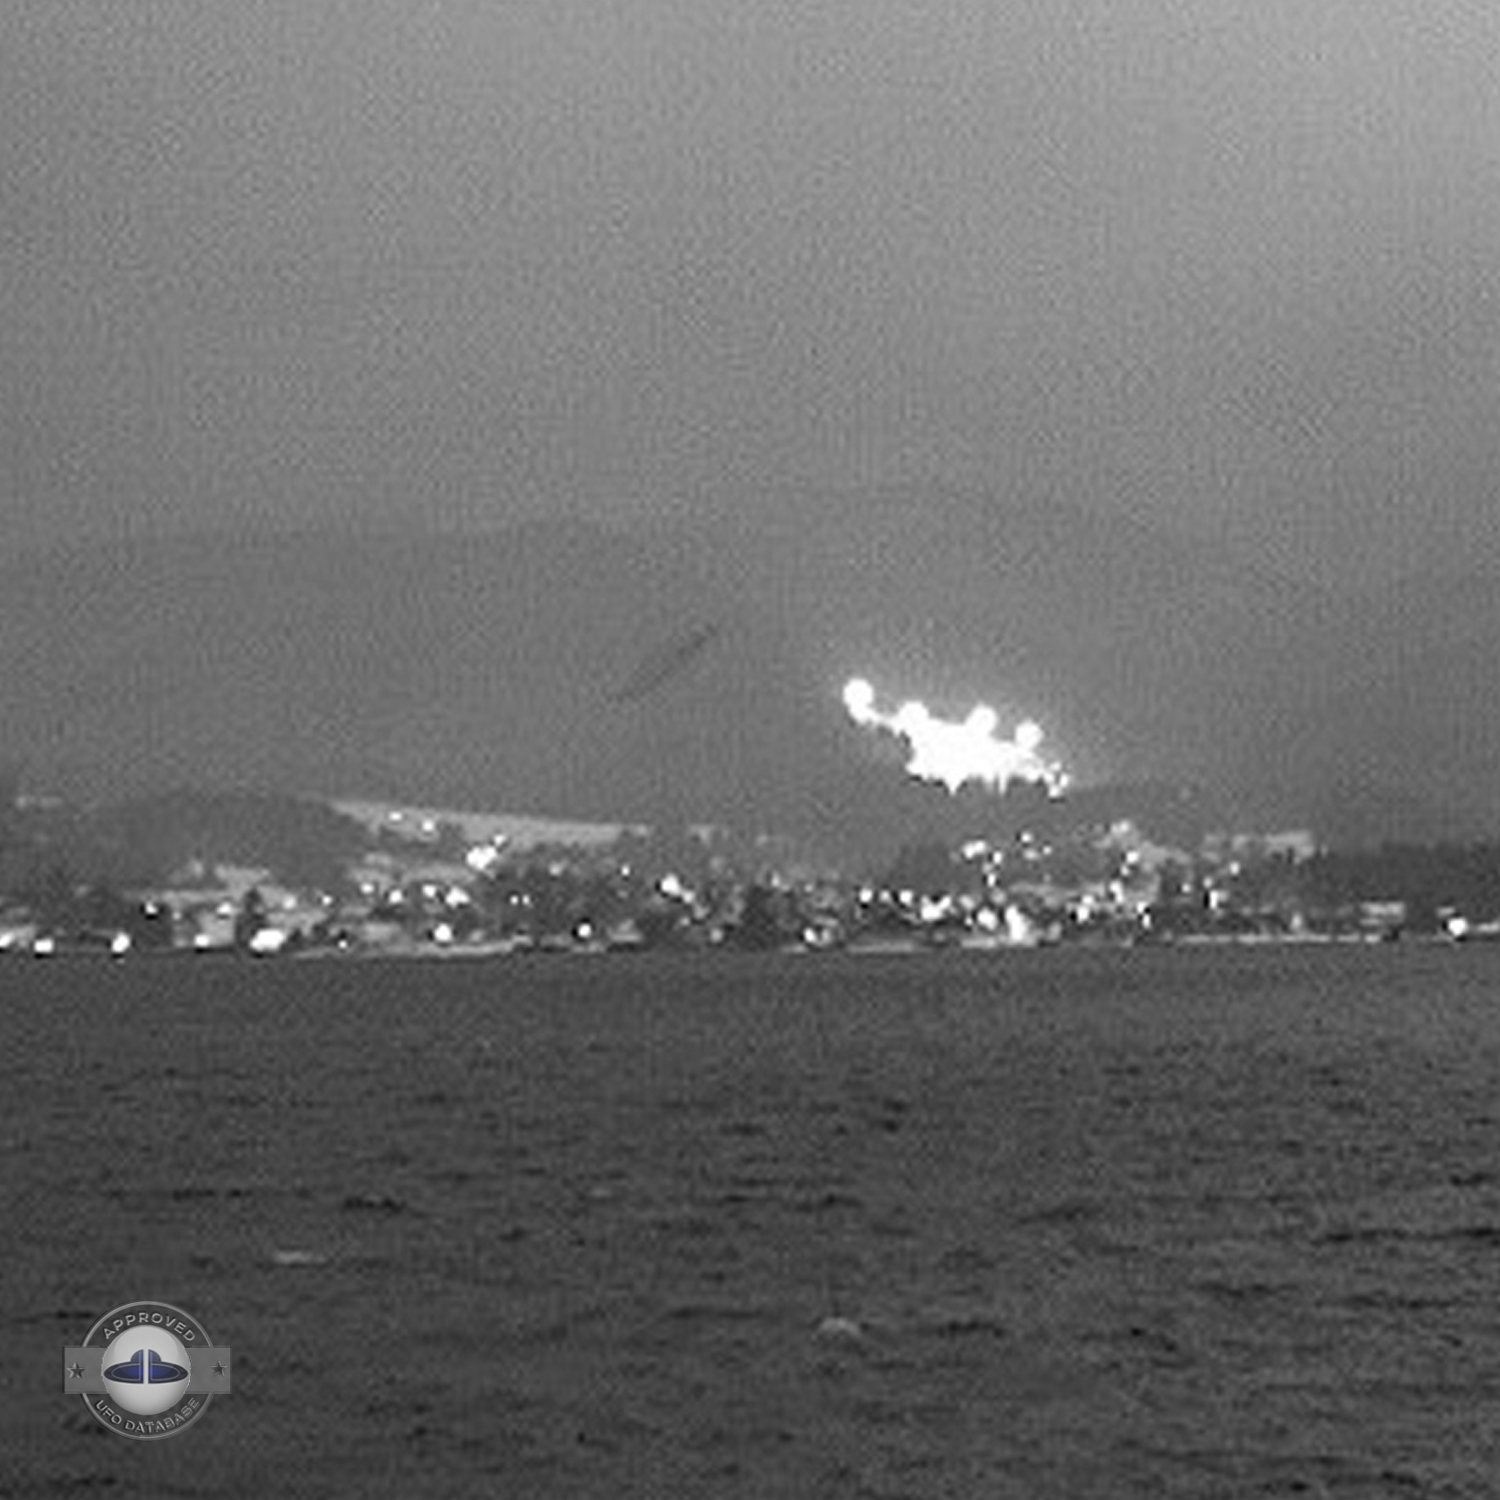 Live Cam capture of UFO USO near water surface | Geisenfeld, Germany UFO Picture #203-2